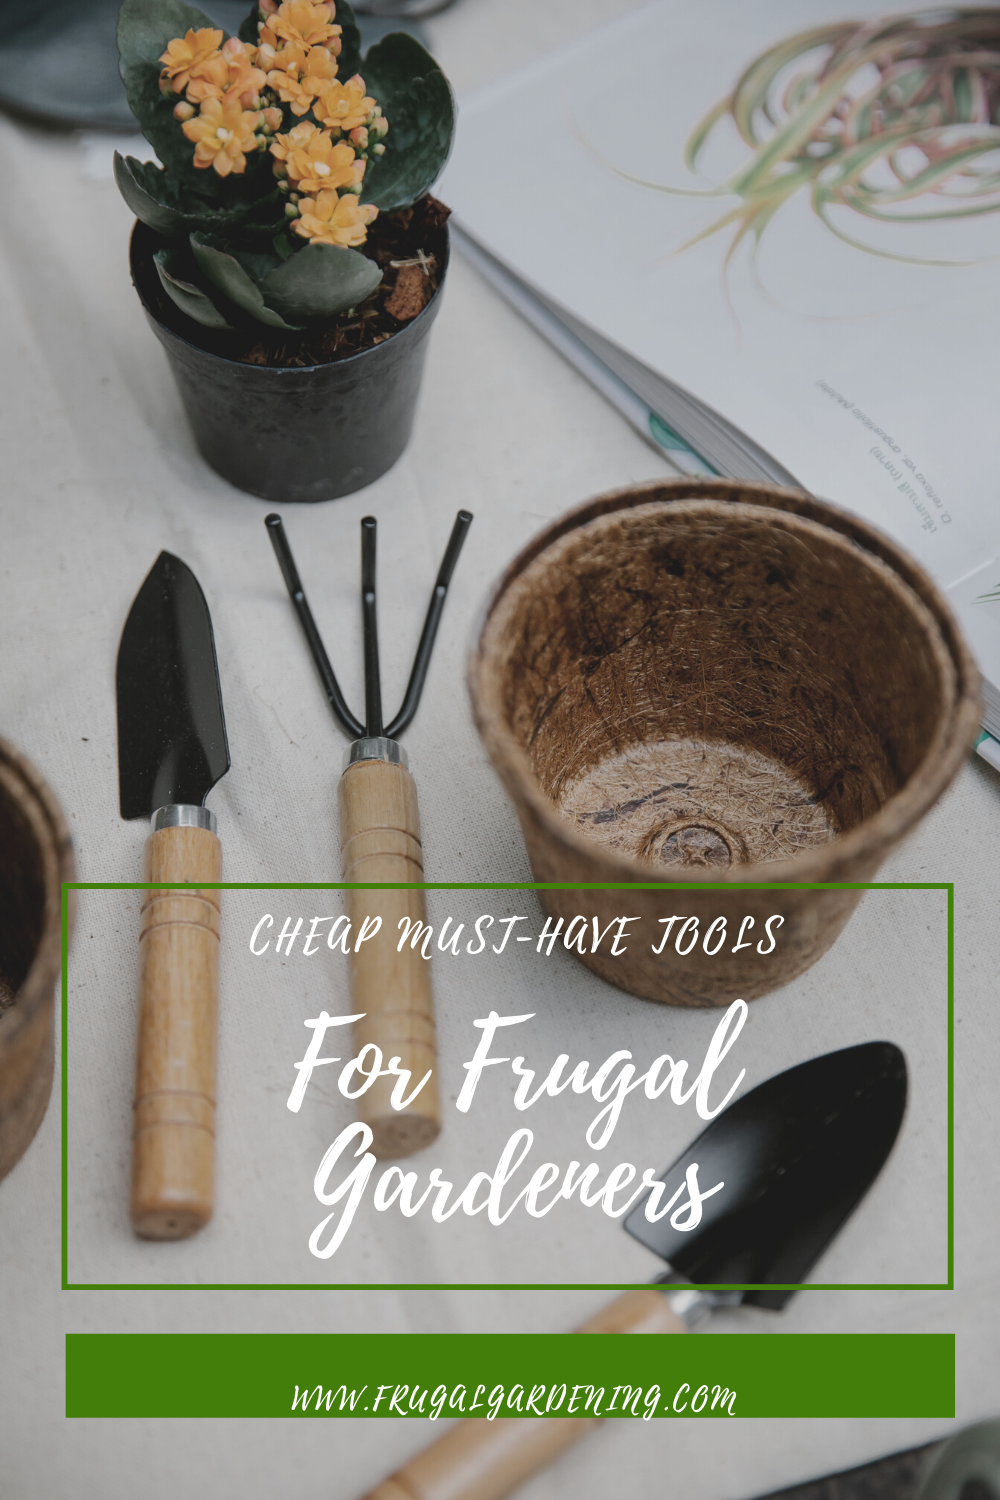 Cheap Must-Have Tools For Frugal Gardeners